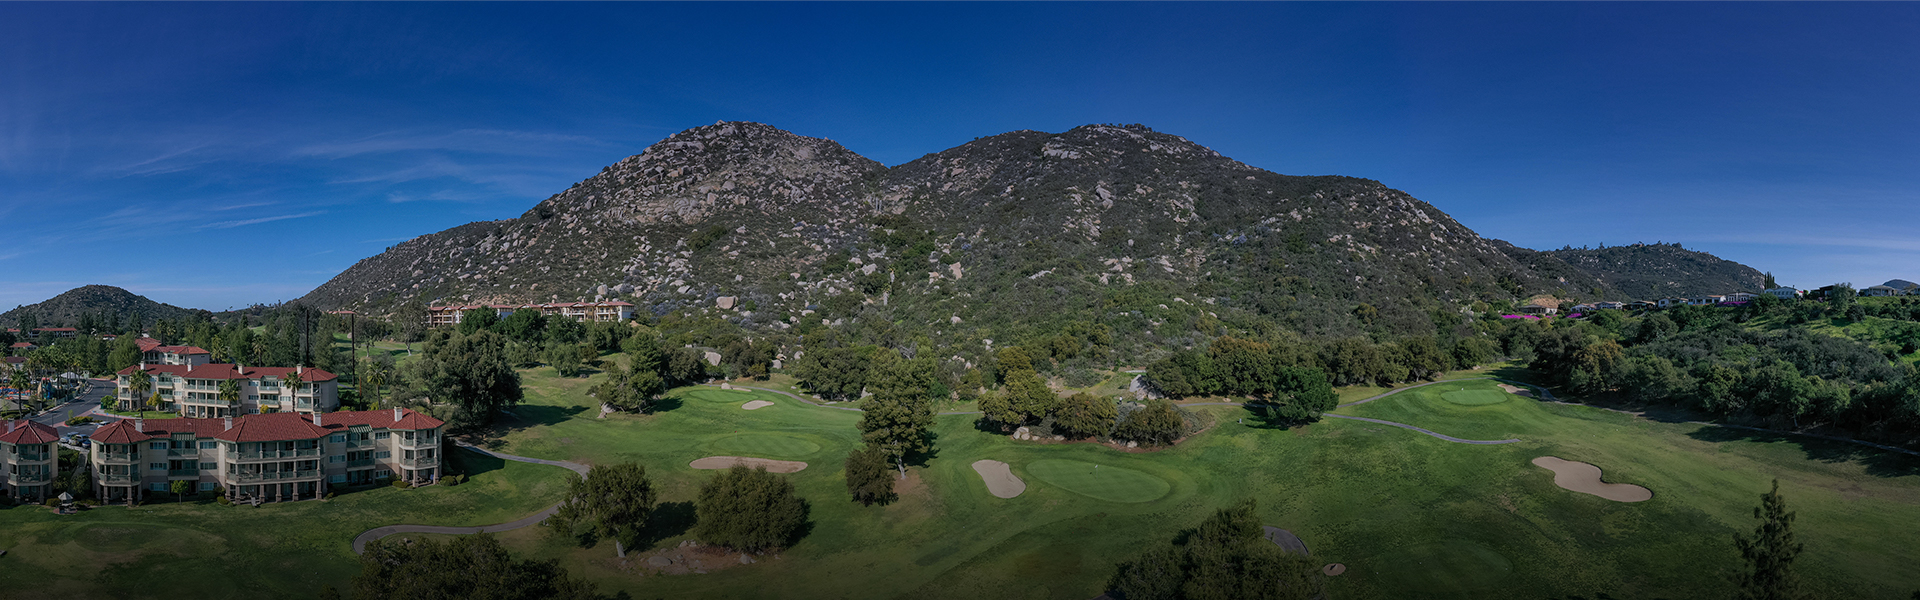 panoramic view of the course with a large mountain in the distance and clear blue skies